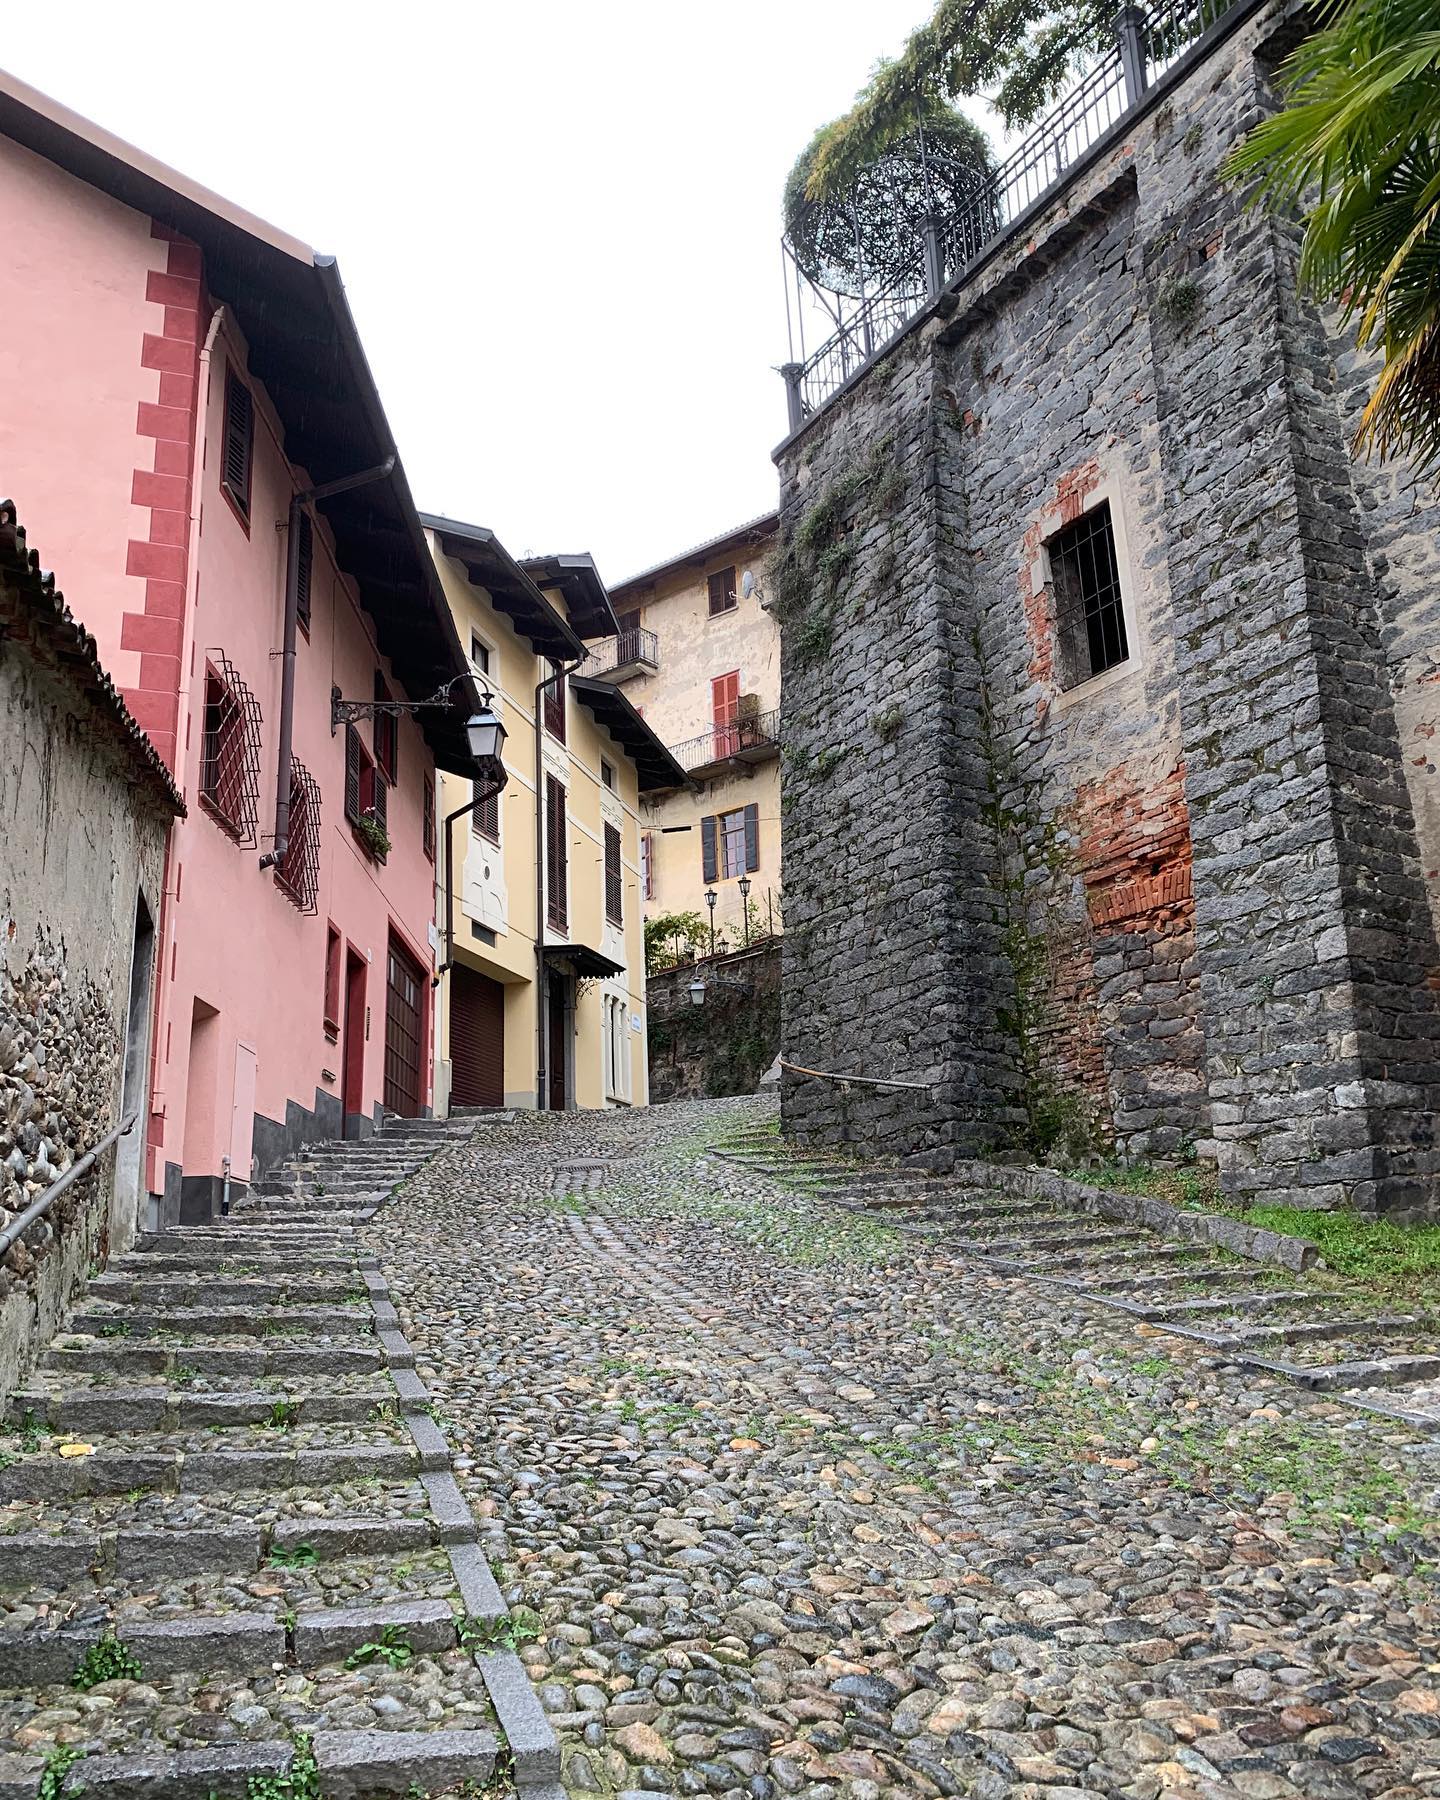 Climbing. Old towns are great but it can be hard to arrive at the destination... 😁😁
-
#travelphotography #travel #travelgram #travelblogger #traveling #travelingram #travelitaly #travelitalia #travelitaly🇮🇹 #travels #travelholic #travelguide #travelworld #traveler